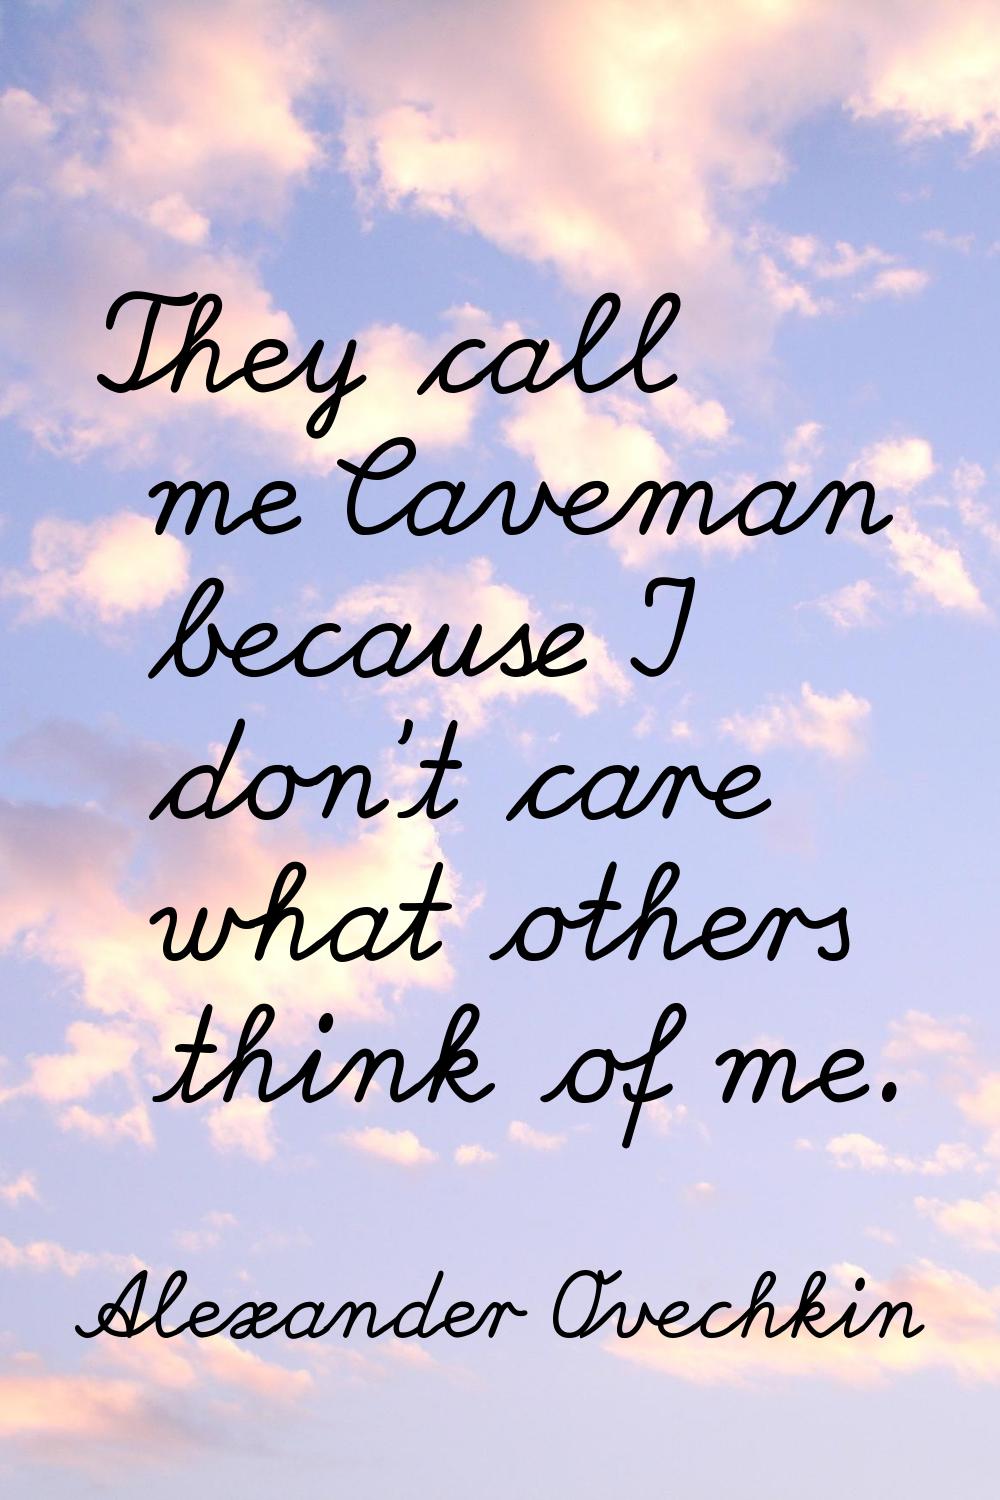 They call me Caveman because I don't care what others think of me.